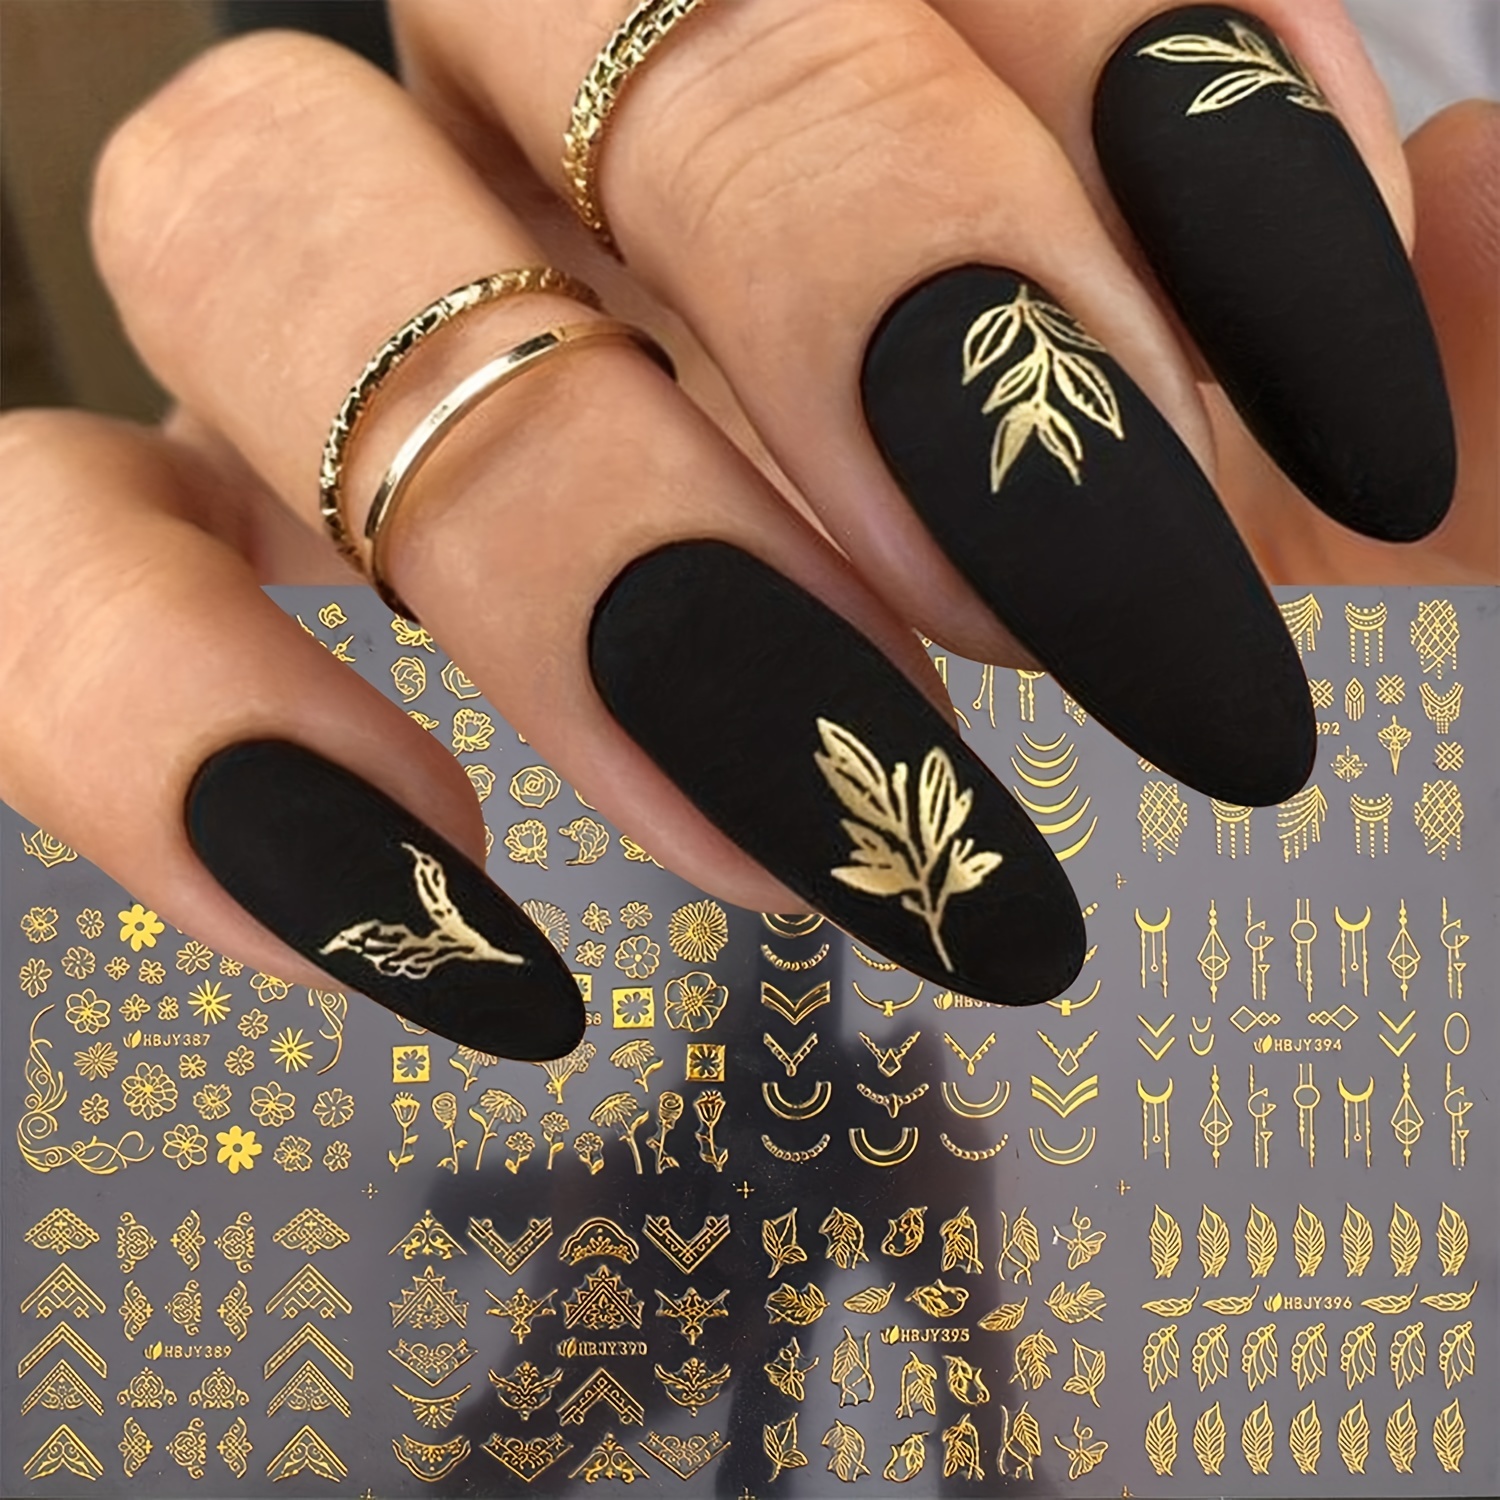 9 Sheets Laser Gold White Foil Nail Stickers Decals,3D Self-Adhesive  Abstract Face Shining Flowers DIY Sticker Nail Art Supplies Golden Leaf  Flower